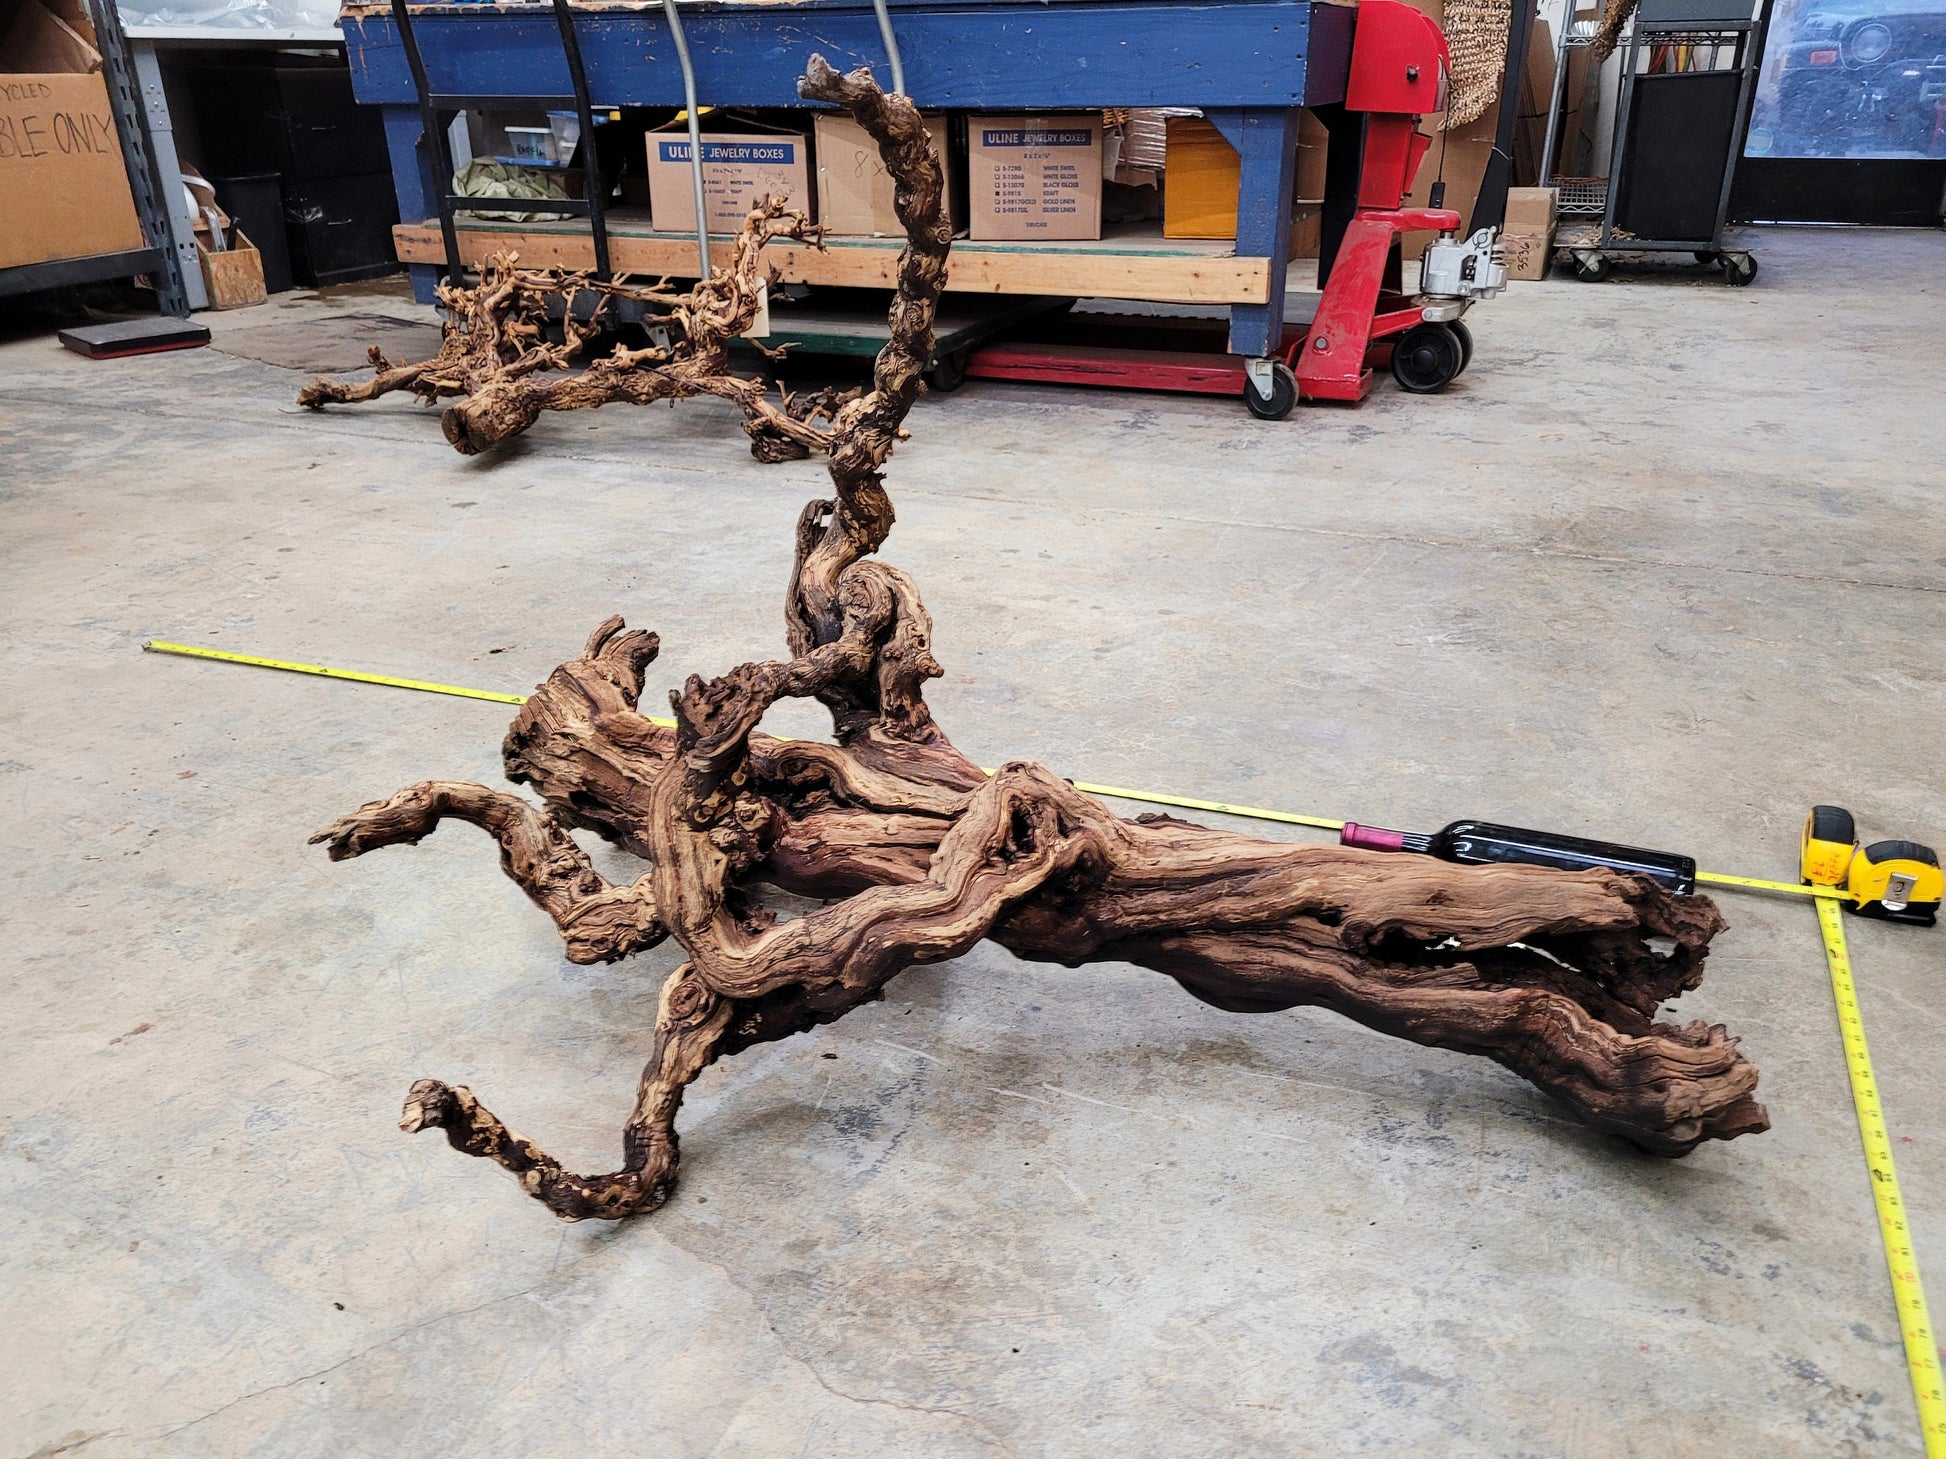 121 Year Old Grape Vine Art From Silver Oak Vineyards retired Napa Zinfandel 100% Recycled + Ready to Ship! 122021-06